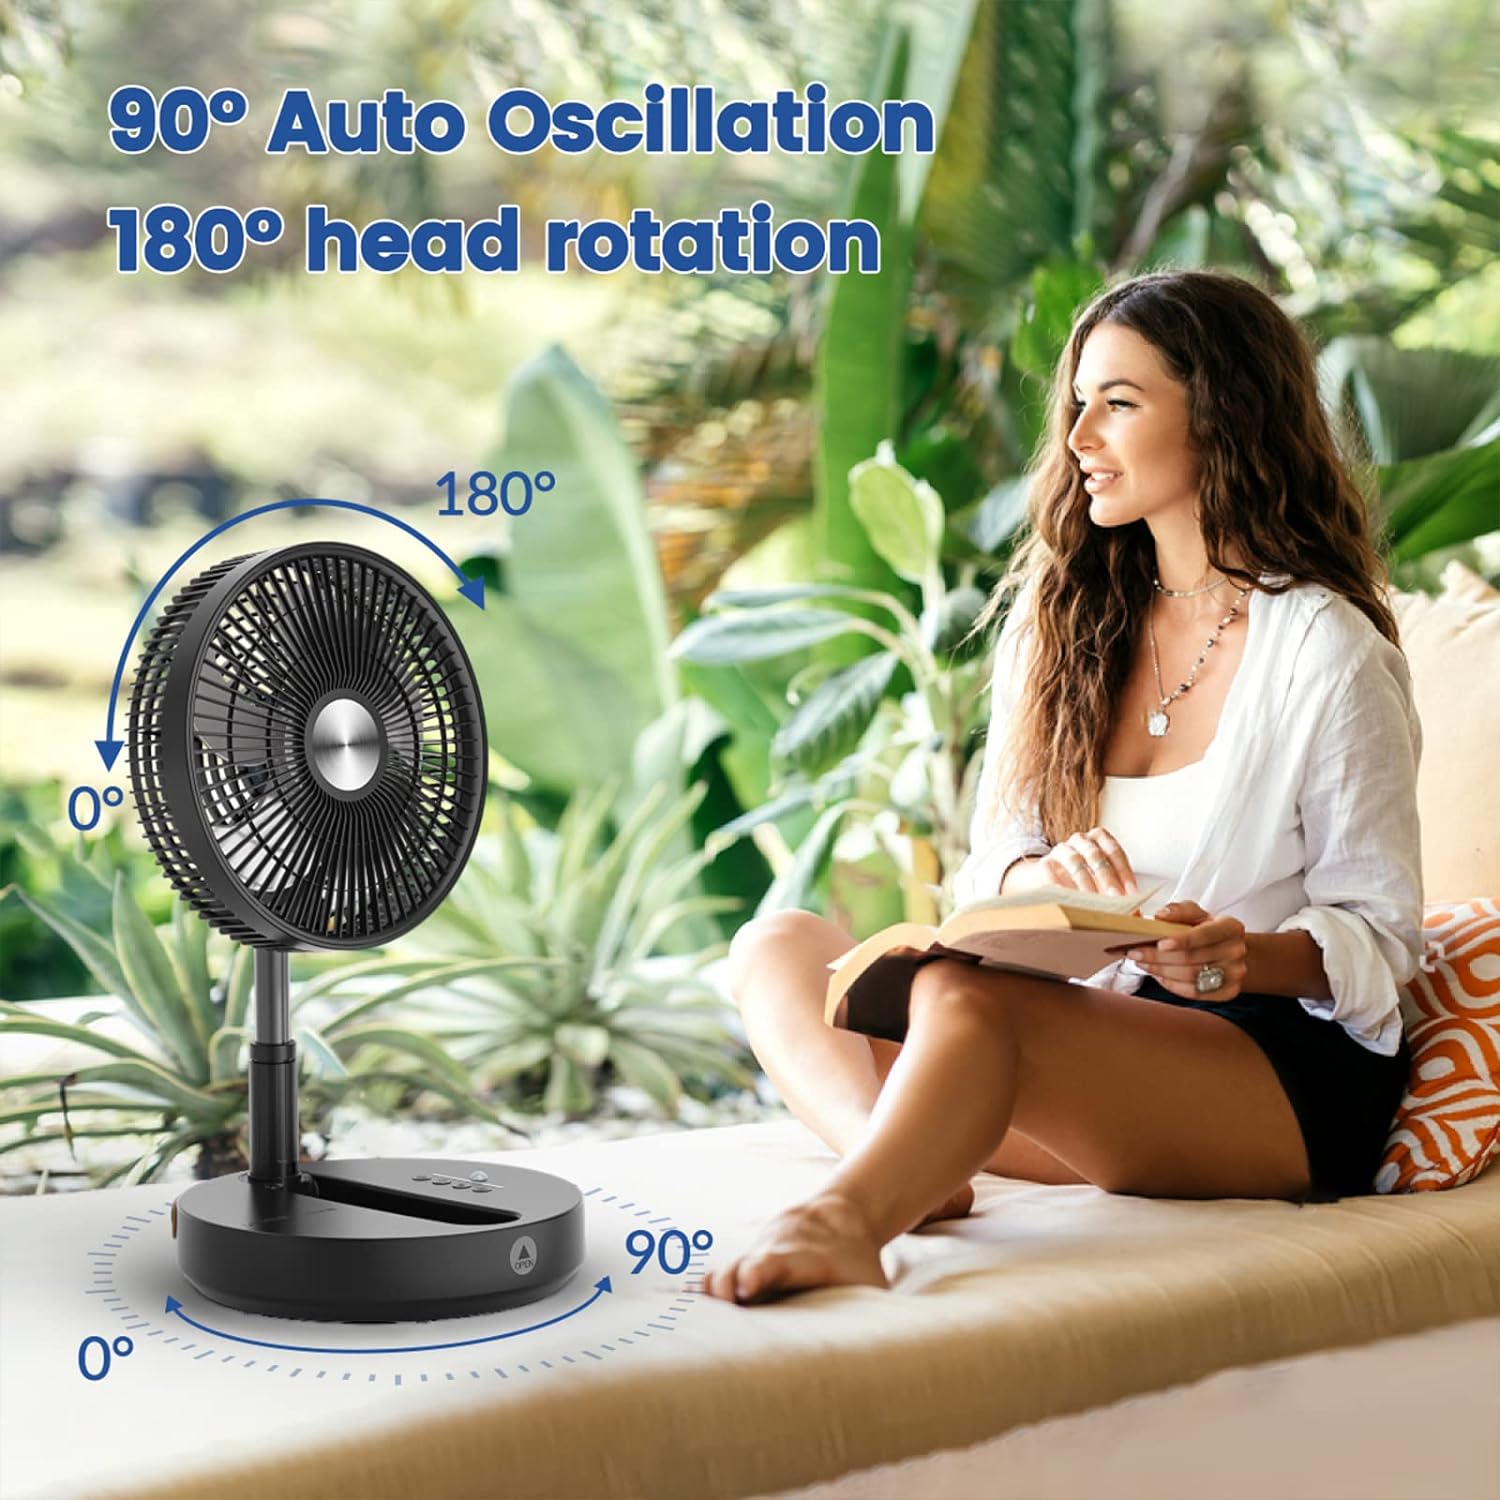 Primevolve 10 inch Oscillating Fan, Battery Operated Fan Adjustable Height, USB Rechargeable- 4 Speeds, 8H Timer Setting for Bedroom Home Office Outdoor Camping Tent Travel